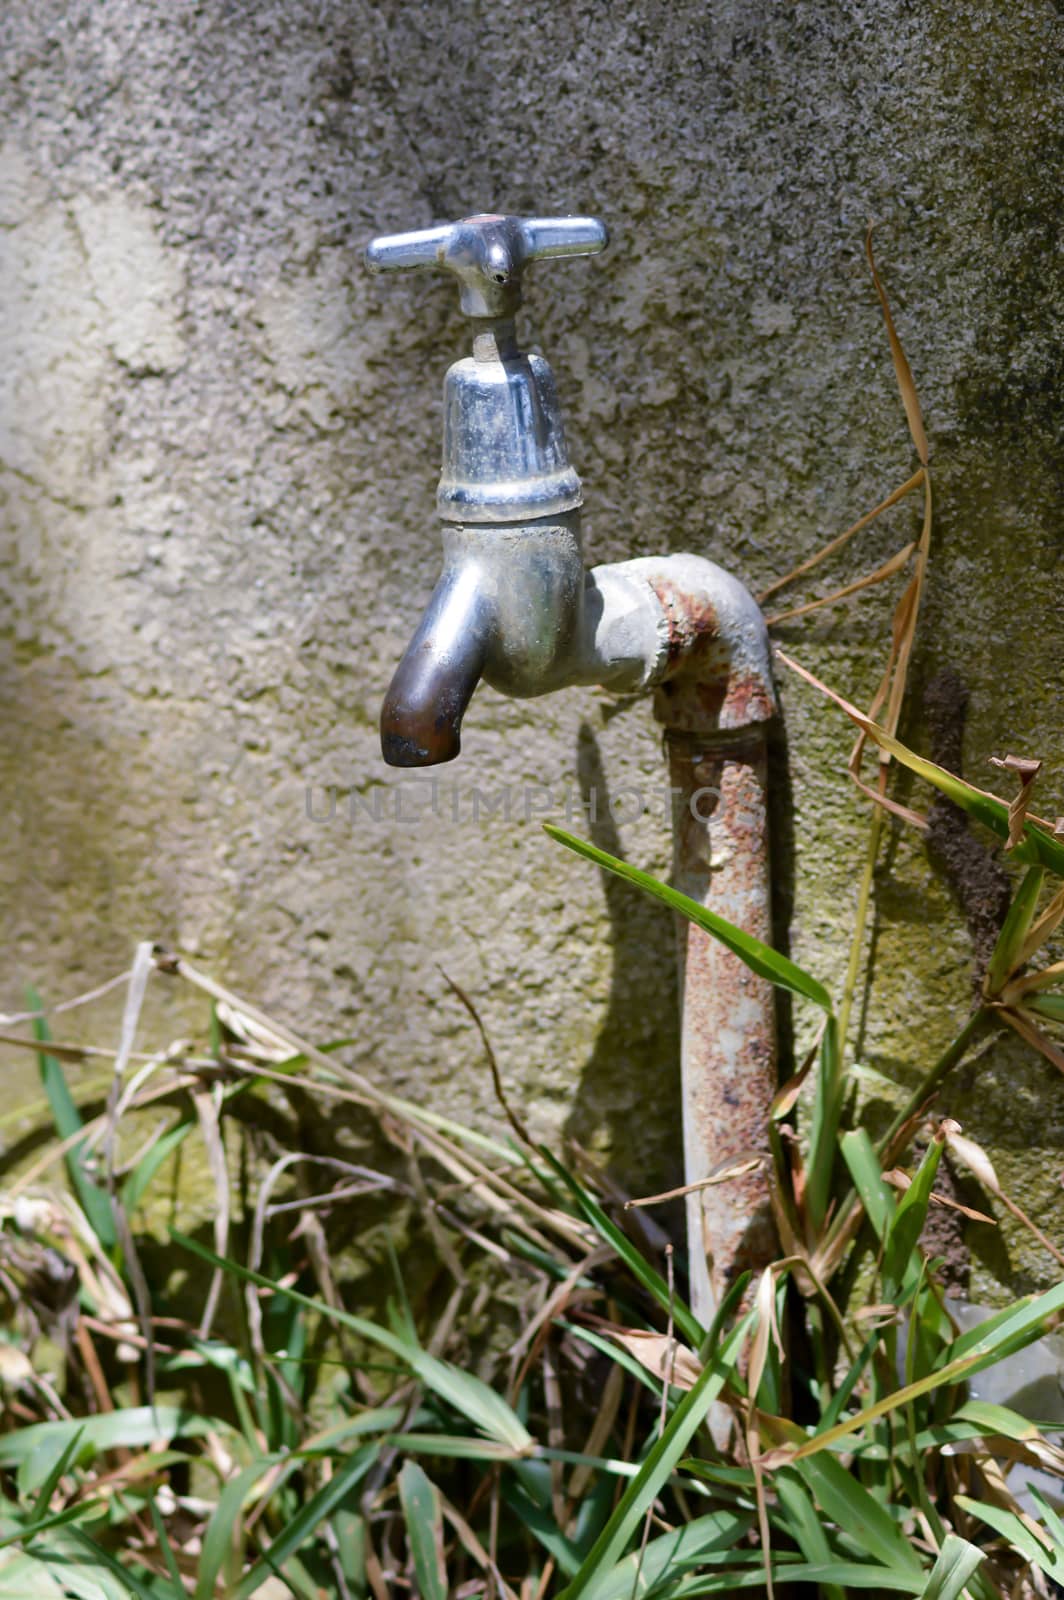 Water supply tap in the garden  by Philou1000